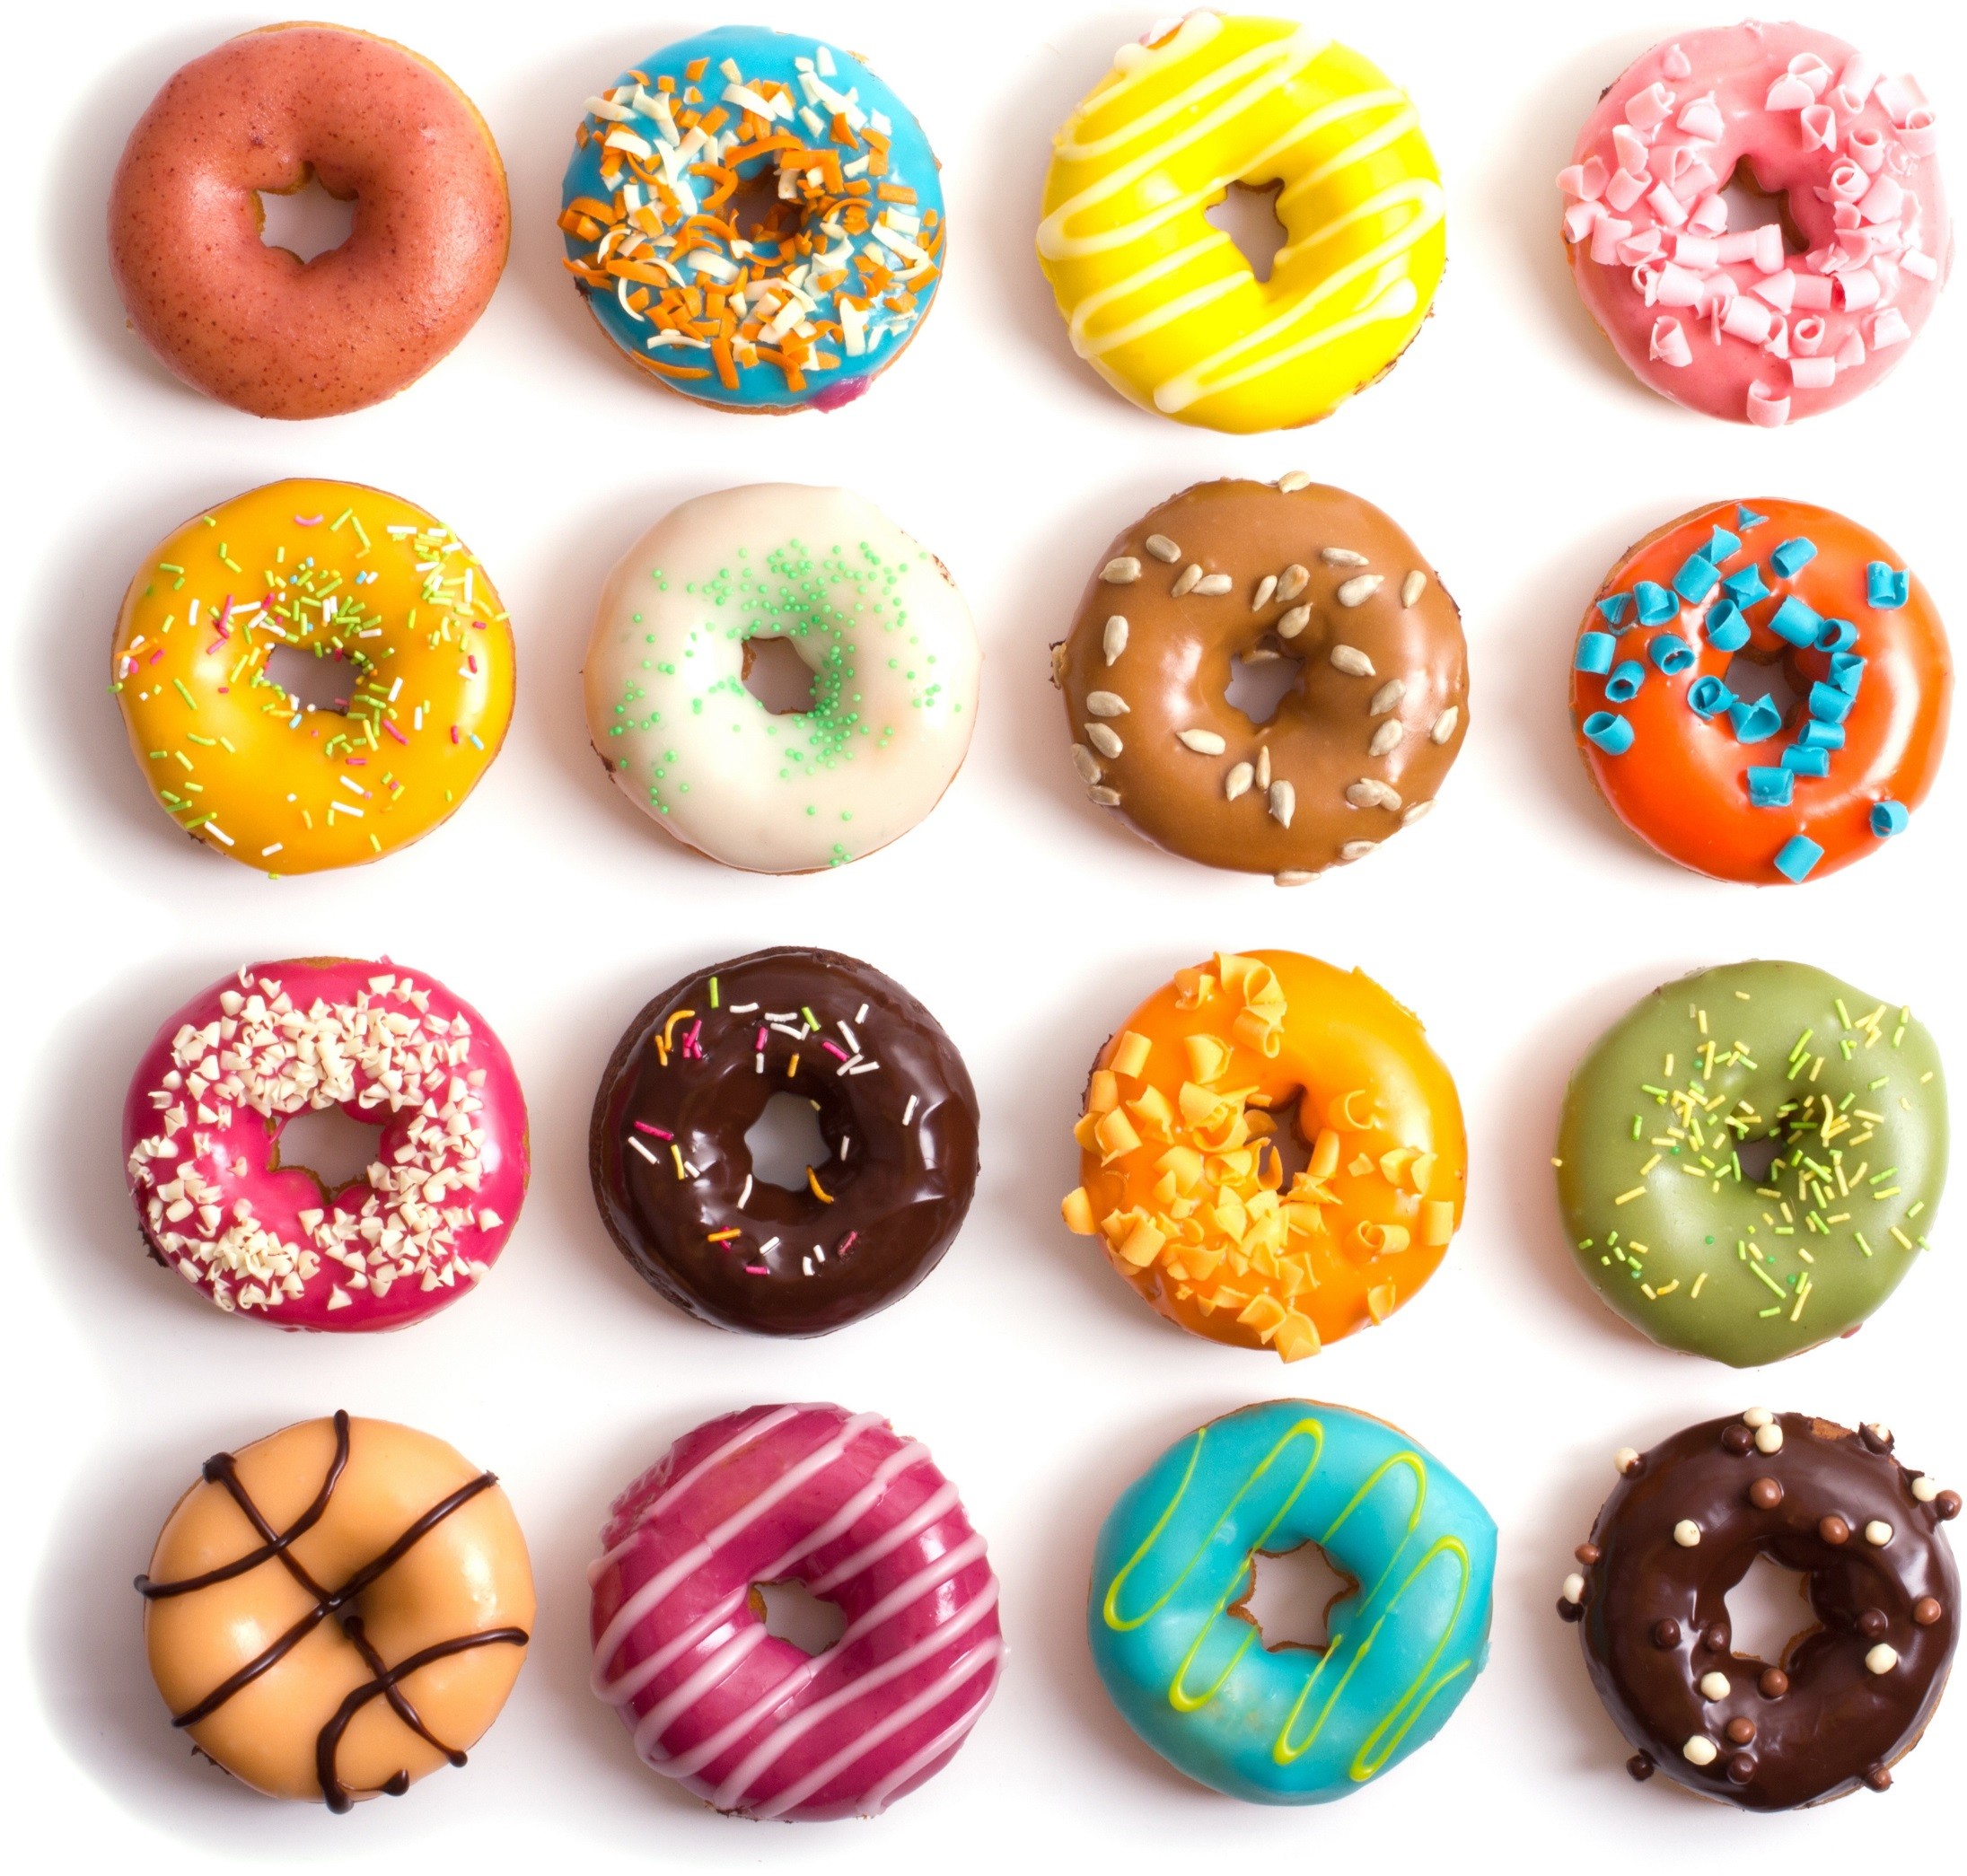 General 2191x2090 donut food sprinkles sweets colorful top view